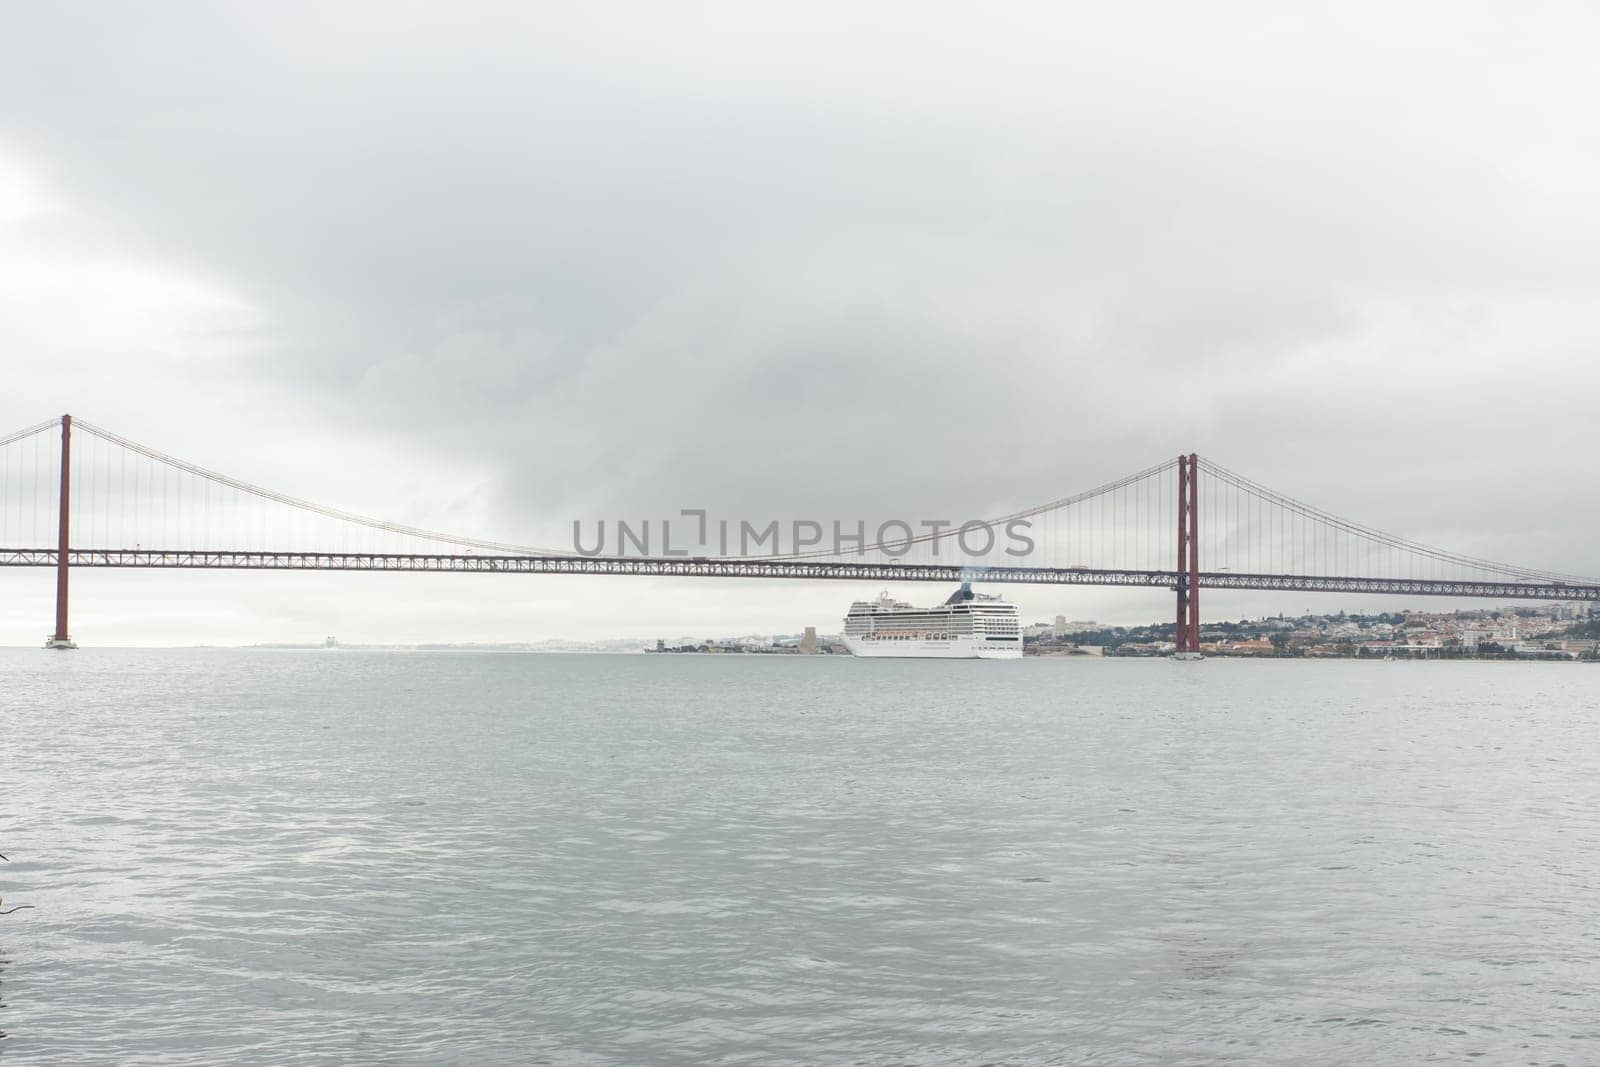 A cruise ship passes along the river under the bridge in cloudy weather. Mid shot